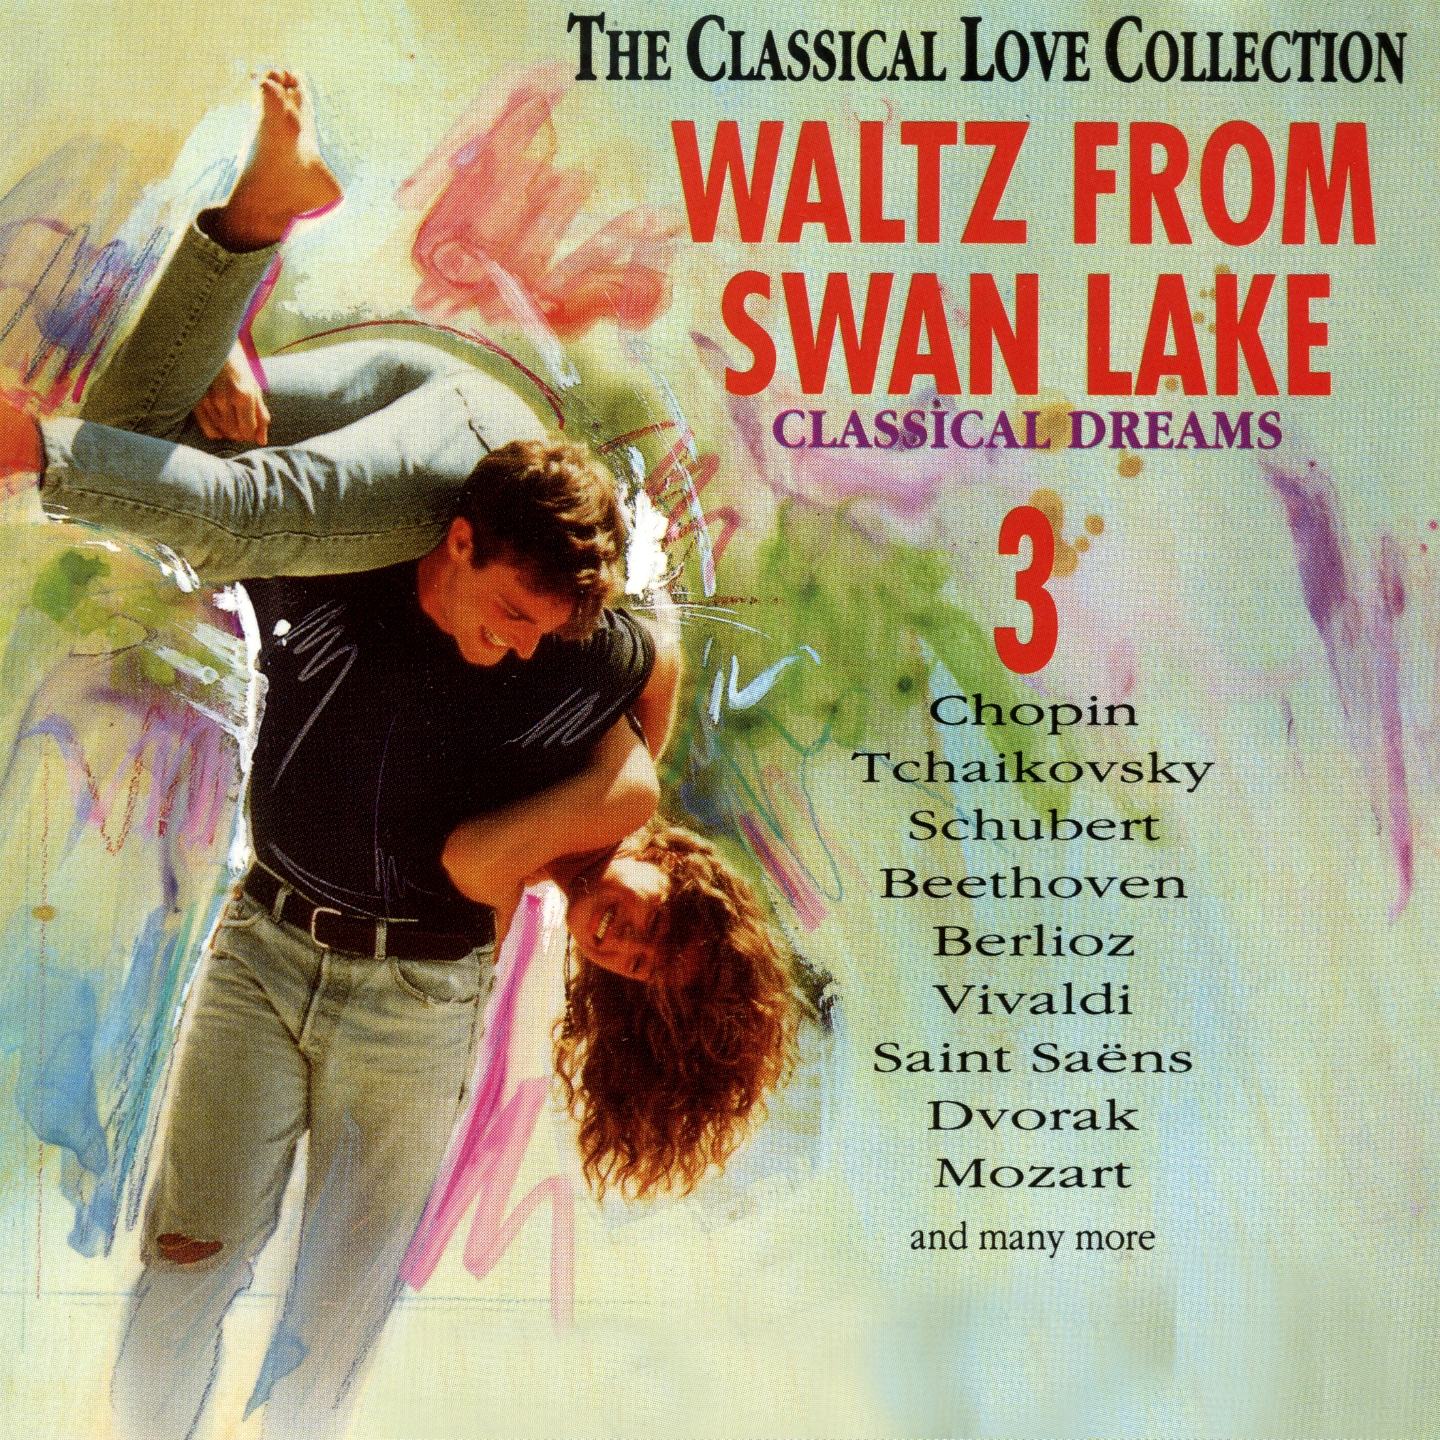 The Classical Love Collection, Vol. 3 (Waltz from the Swan Lake, Classical Dreams)